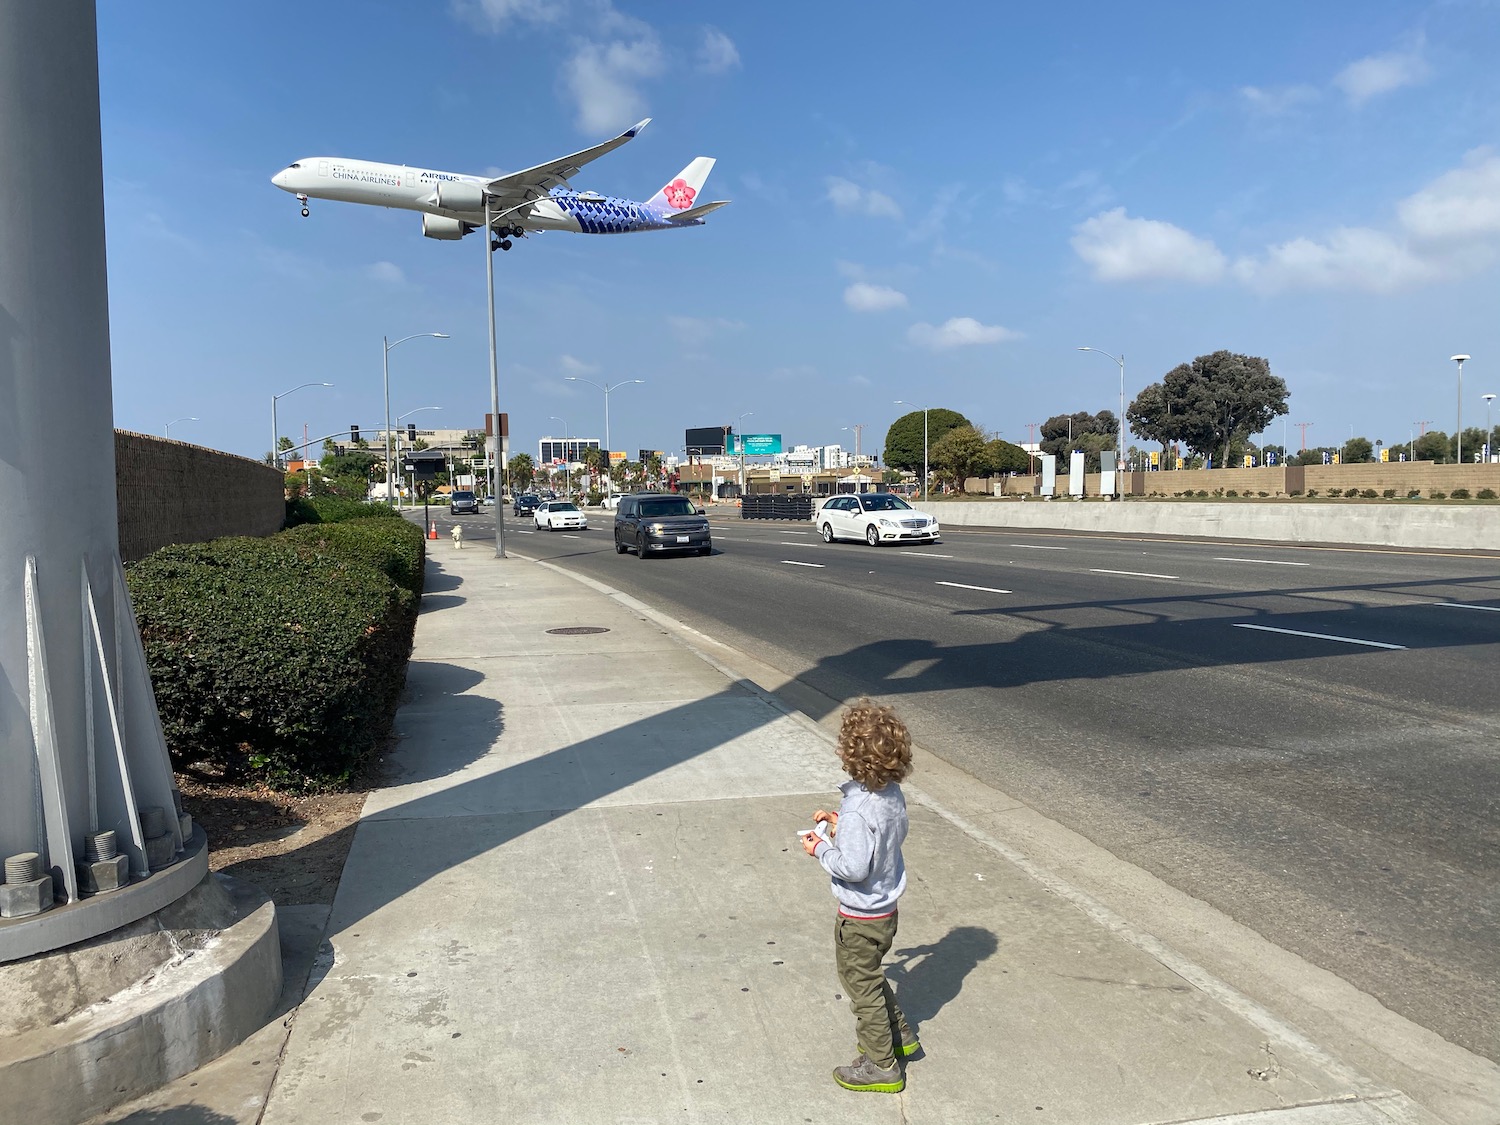 a child standing on a sidewalk looking at an airplane flying over a street